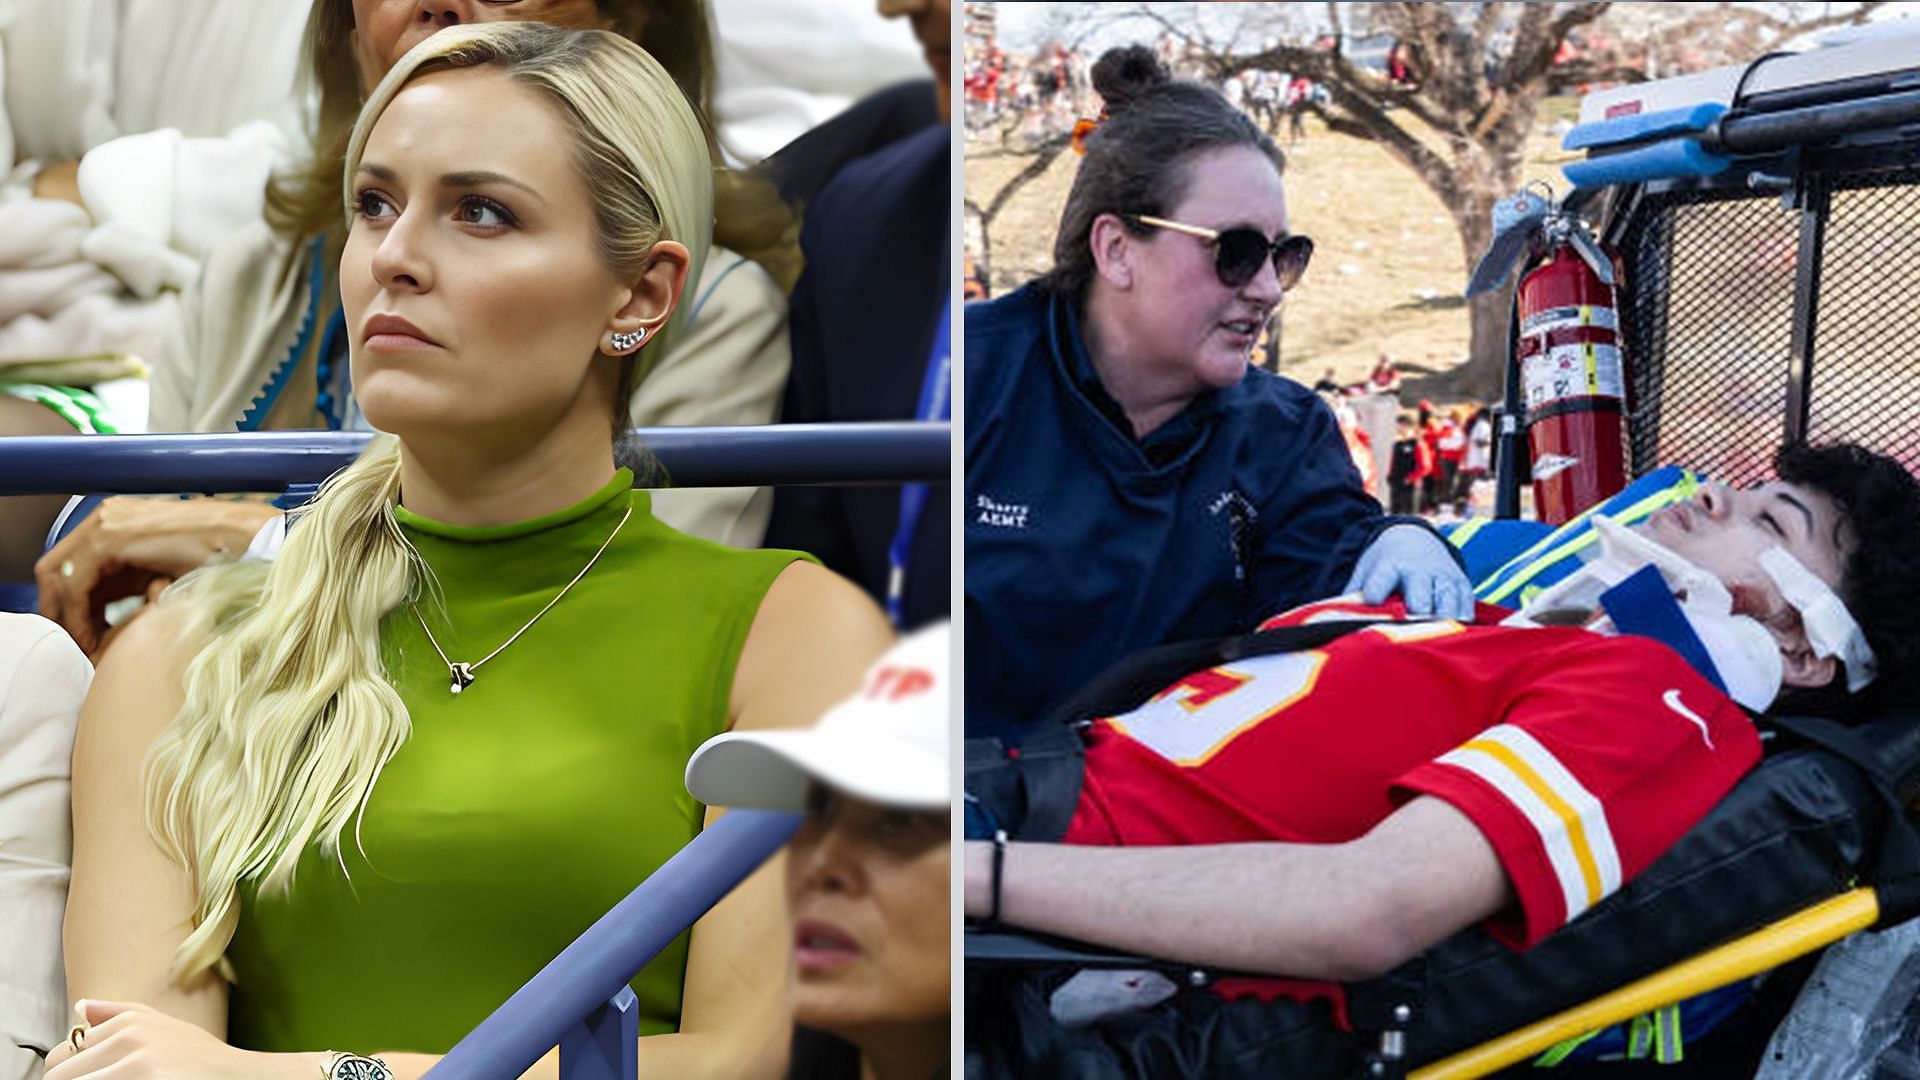 Lindsey Vonn commended the people at the Kansas City Chiefs parade for tackling the gunman.